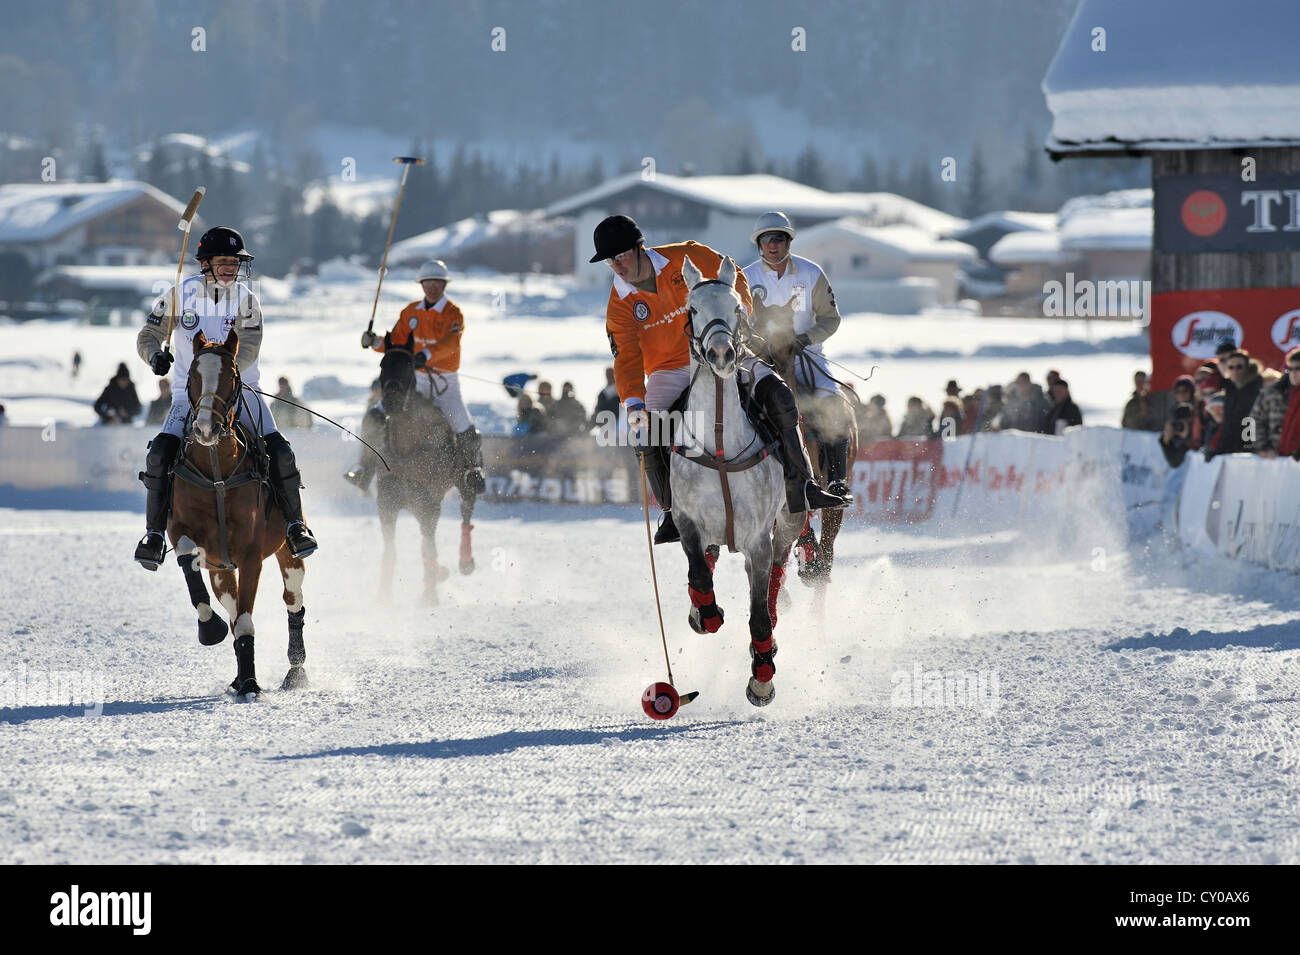 Pedro Fernandez Llorente of team 'Kitzbuehel' playing the ball, followed by Marie-Jeanette Ferch of team 'Parmigiani', polo Stock Photo